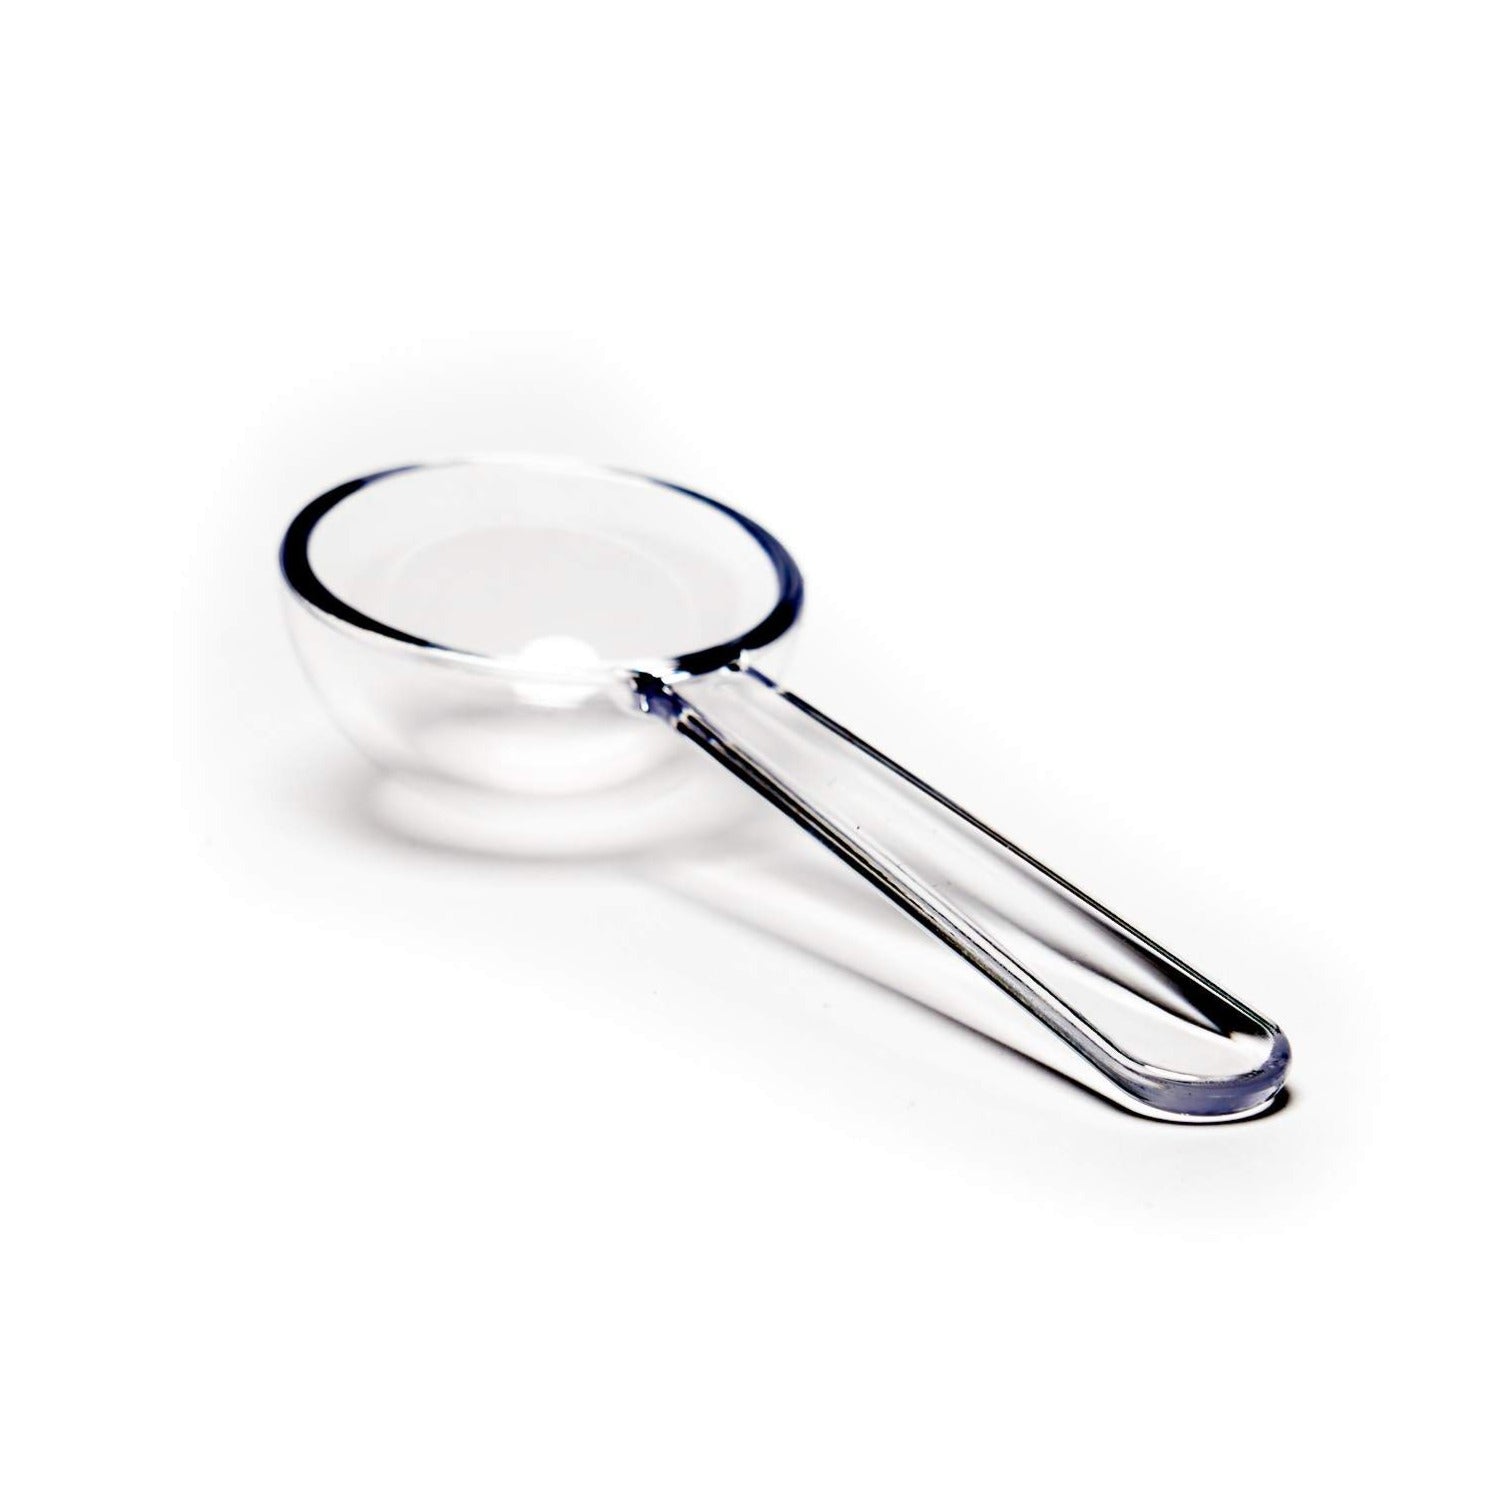 Magnifiers & More - Big Number Measuring Spoons